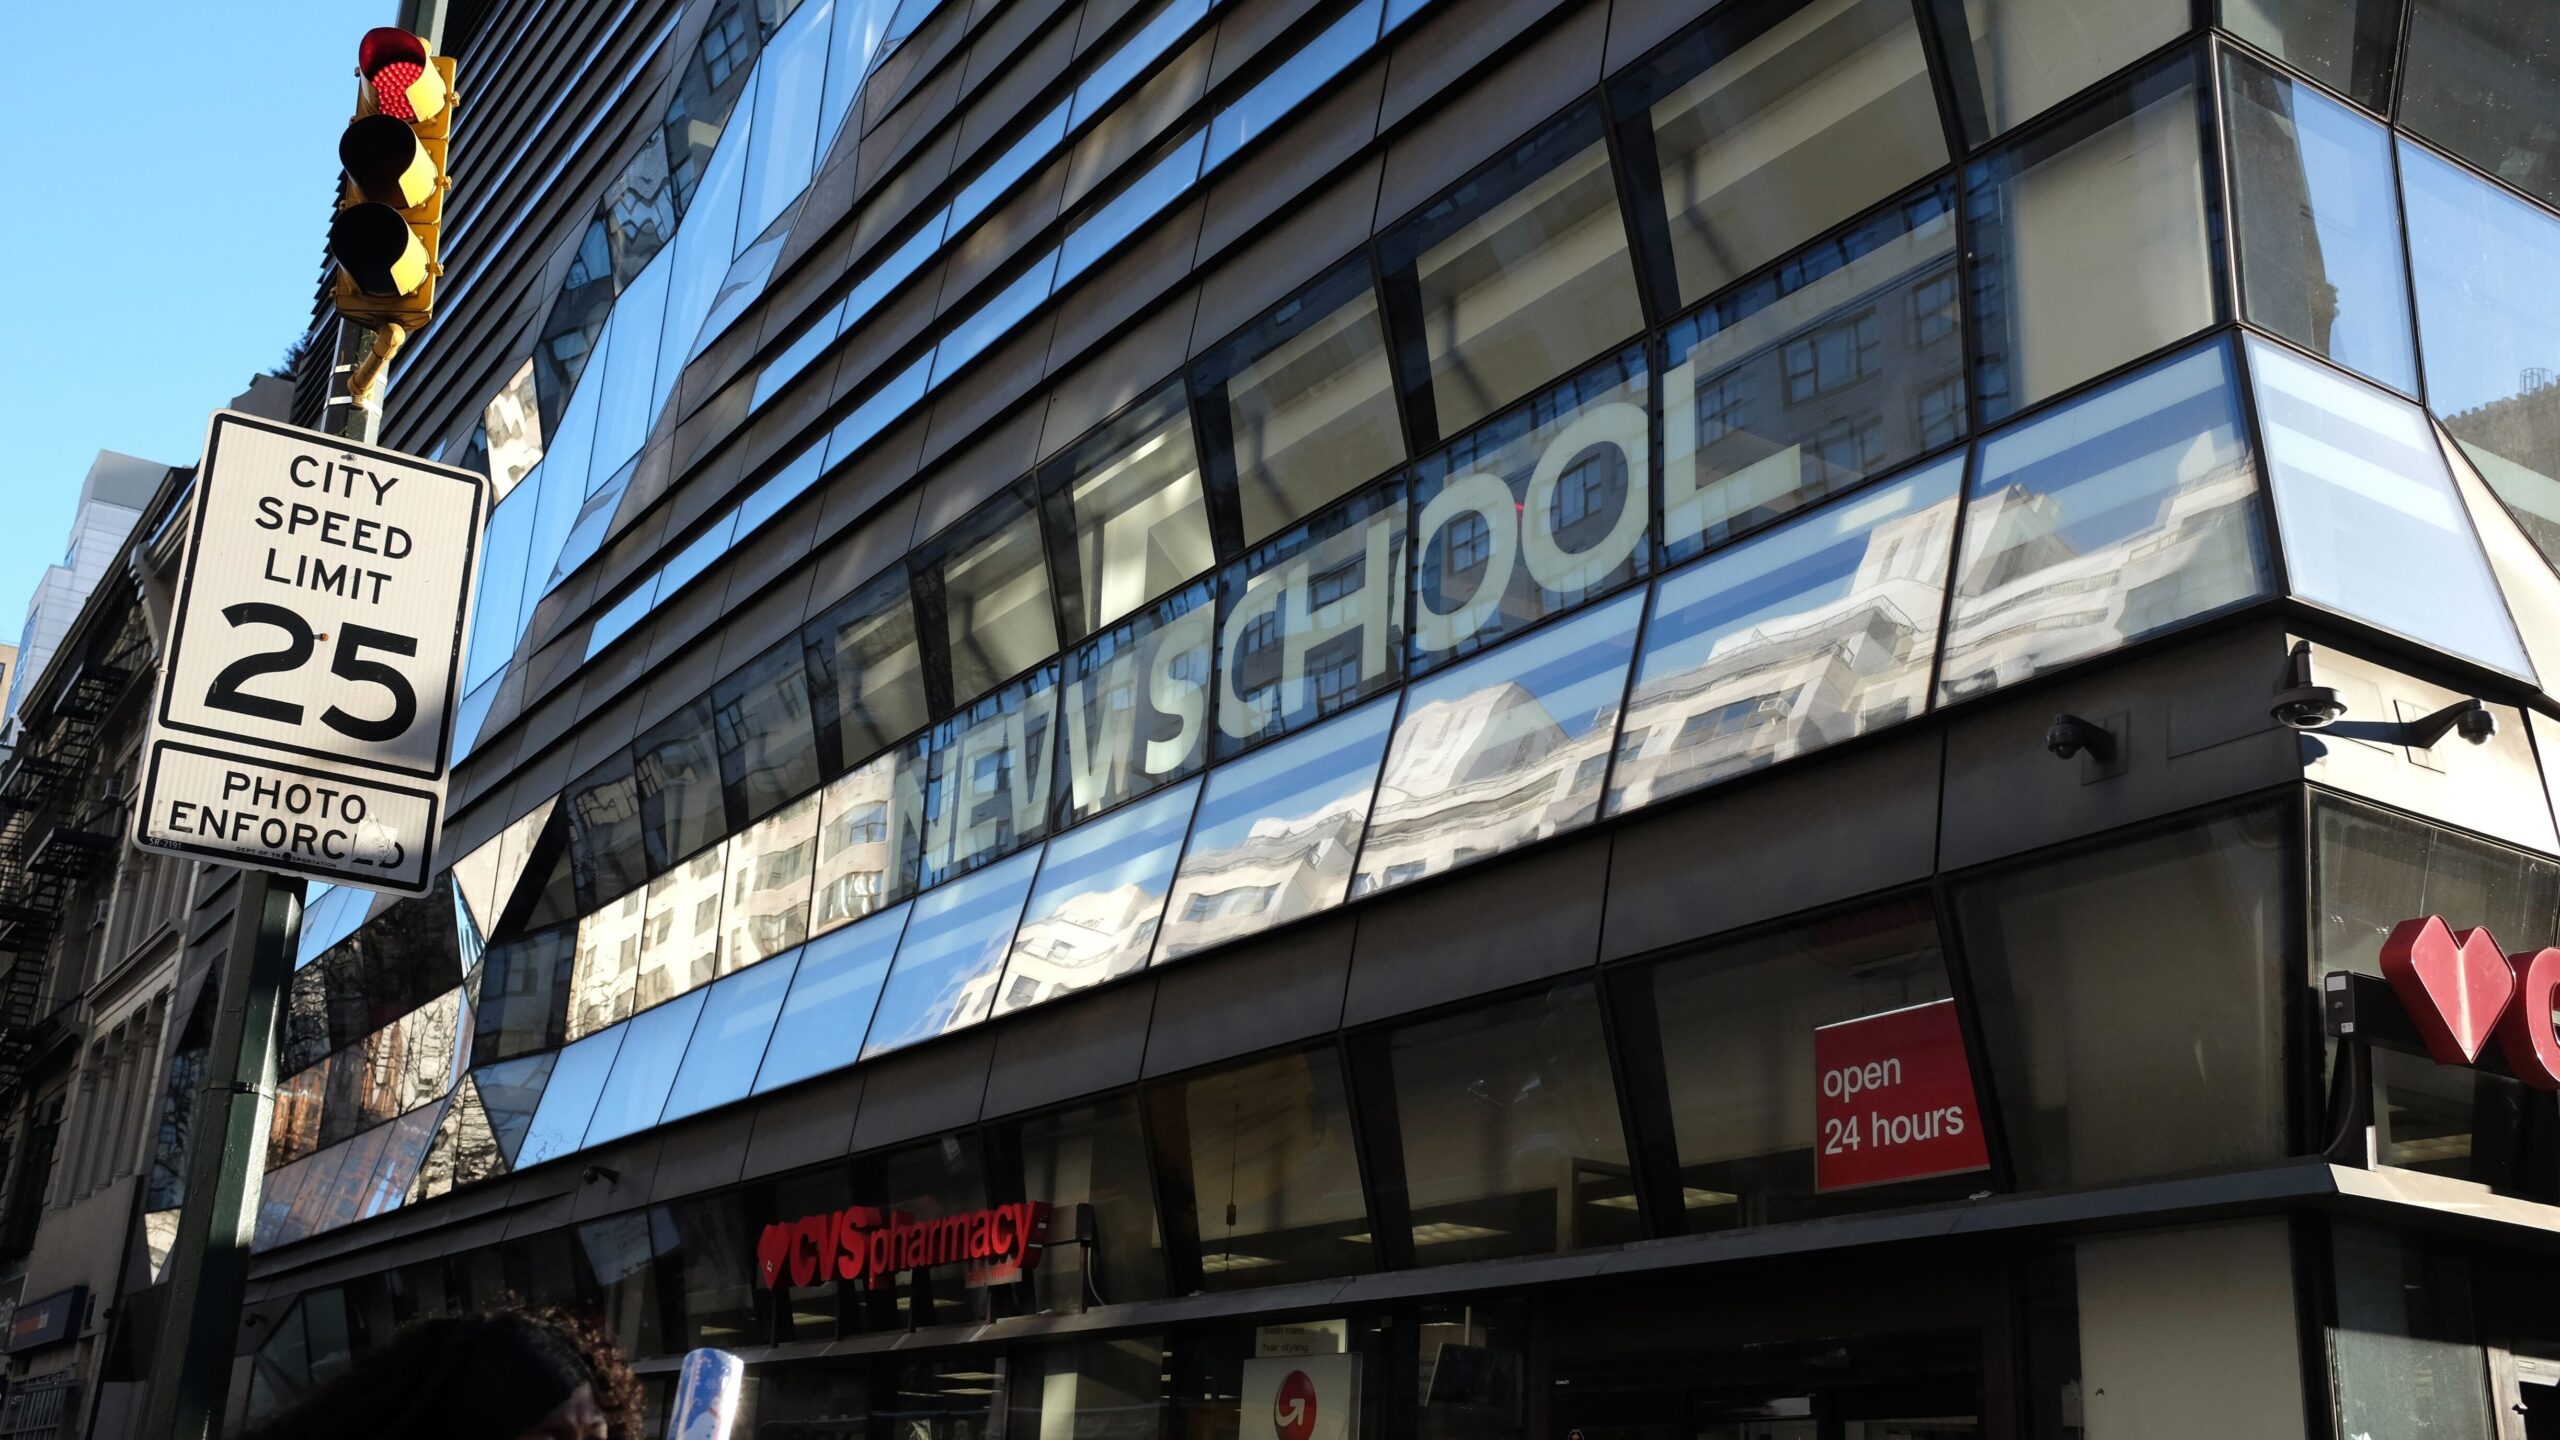 The front of a building with "The New School" spelled out and a speed limit sign in the corner.